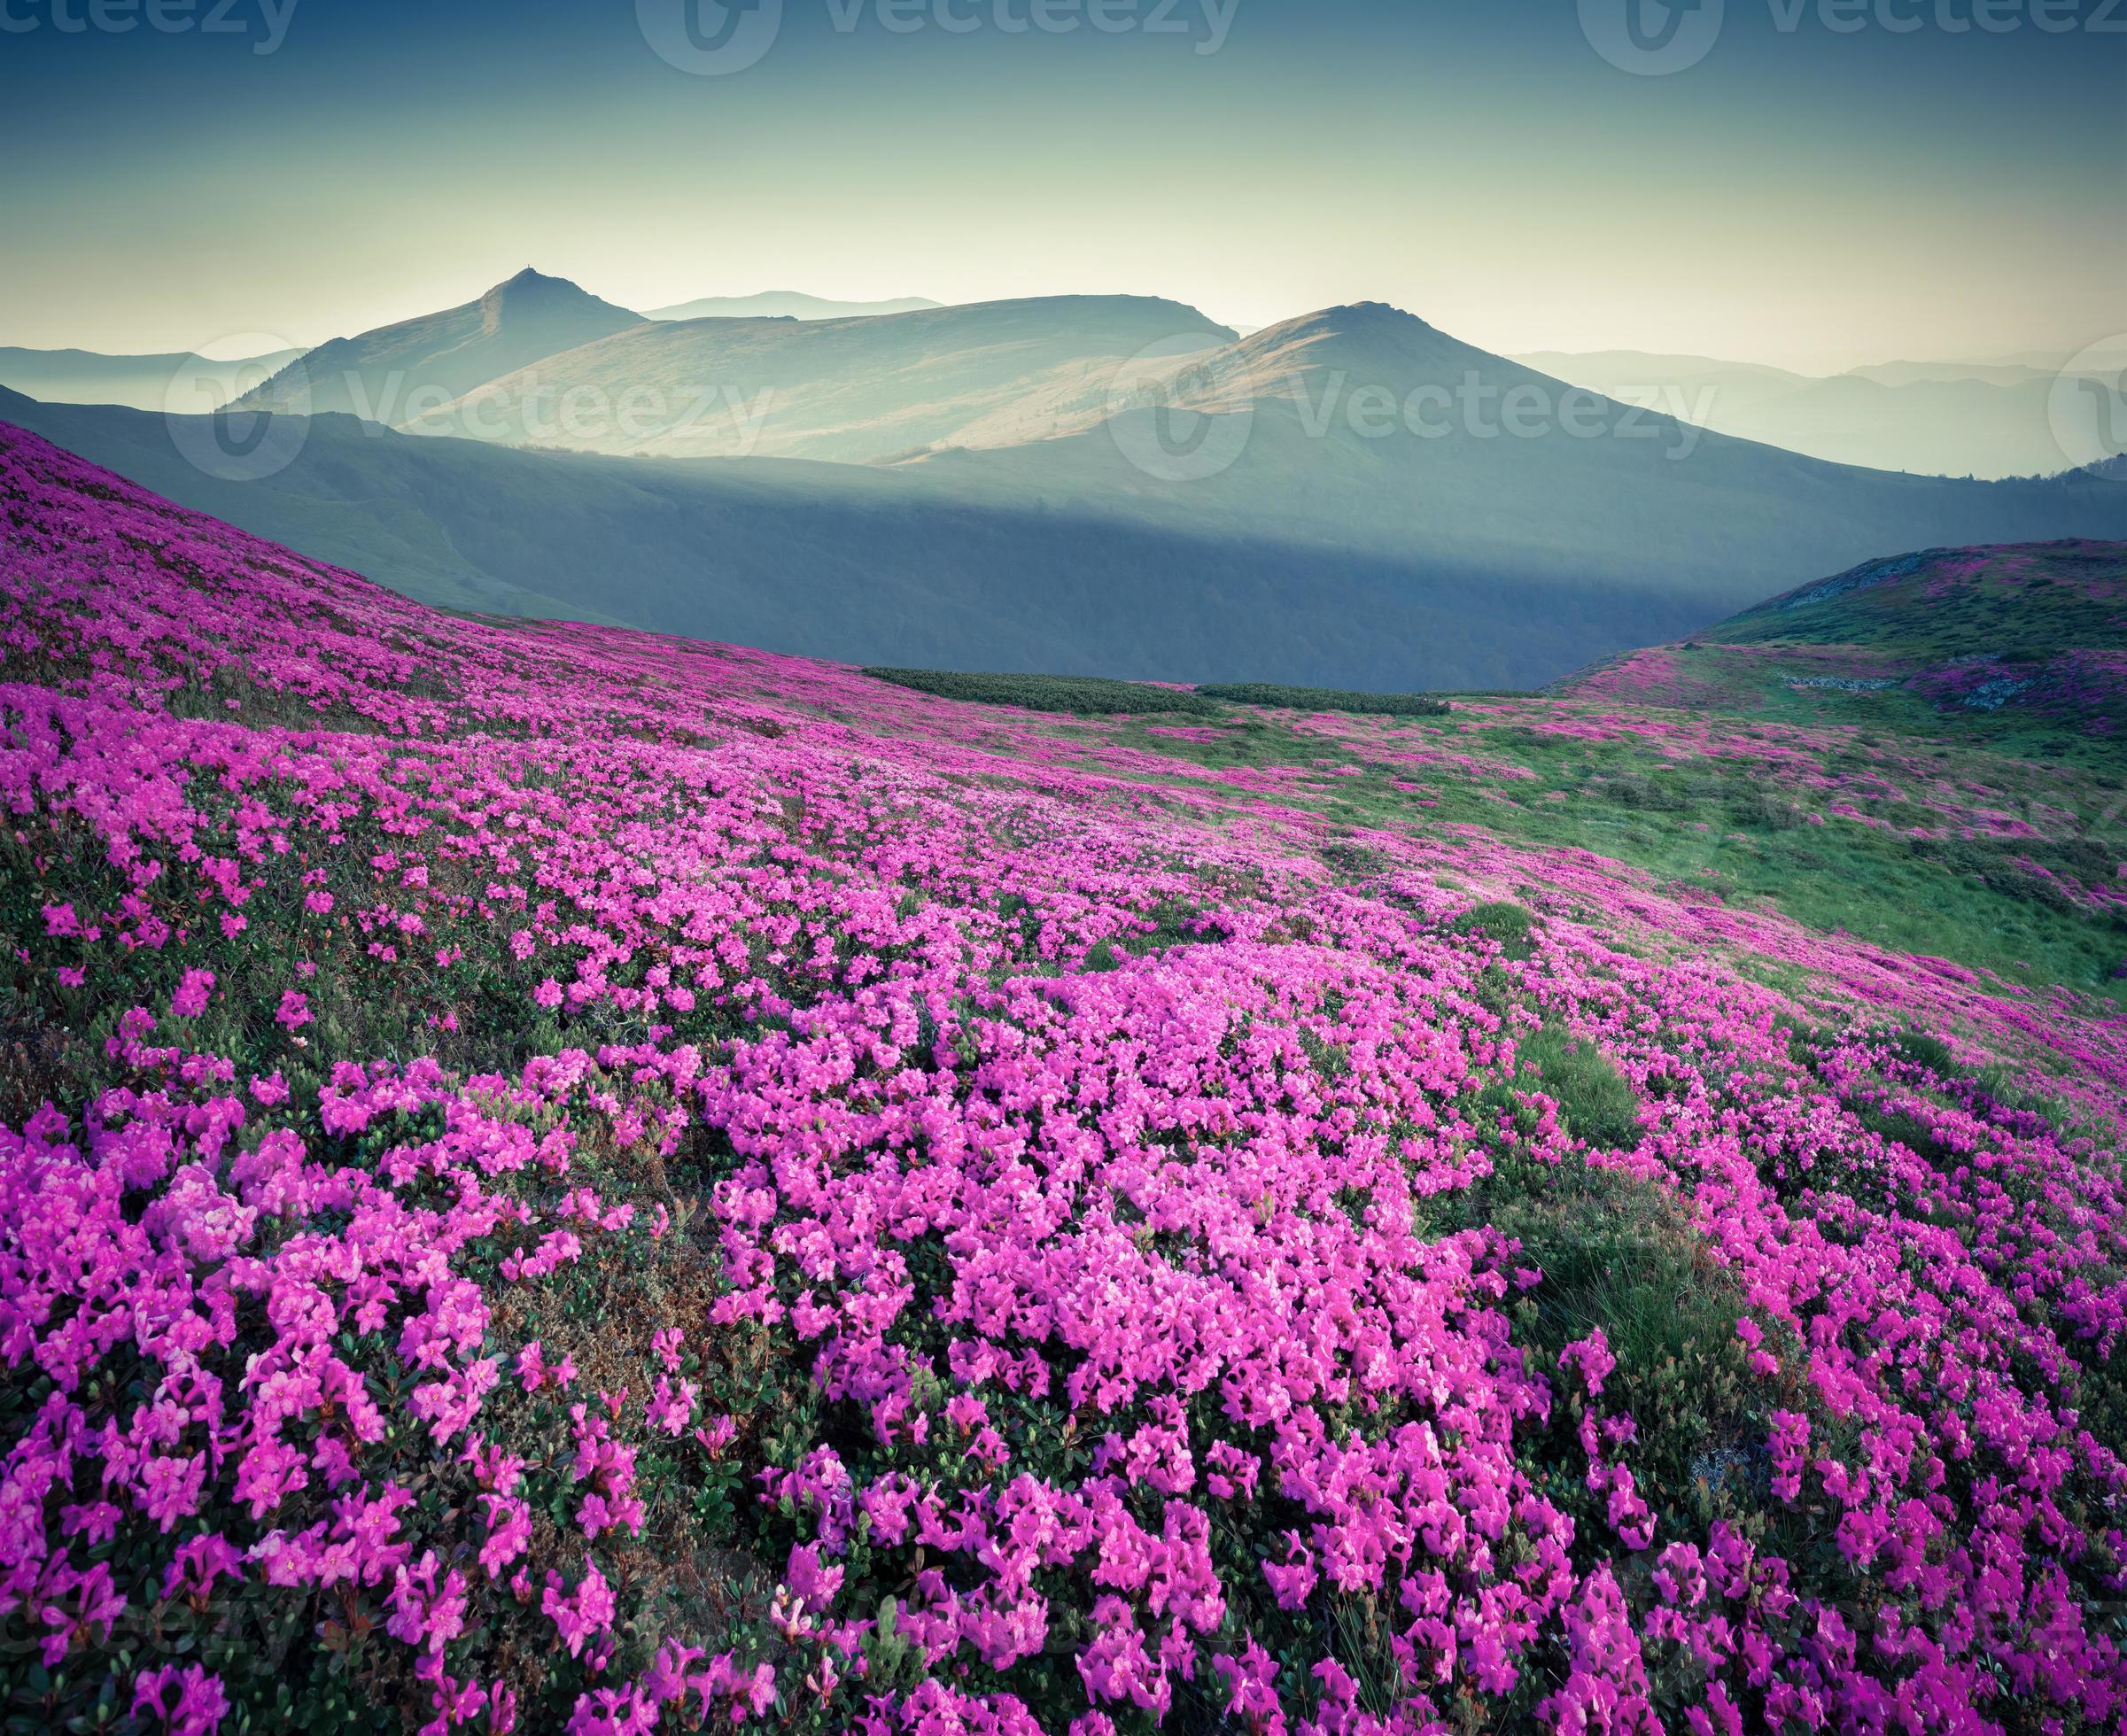 Image of Field of pink rhododendron flowers